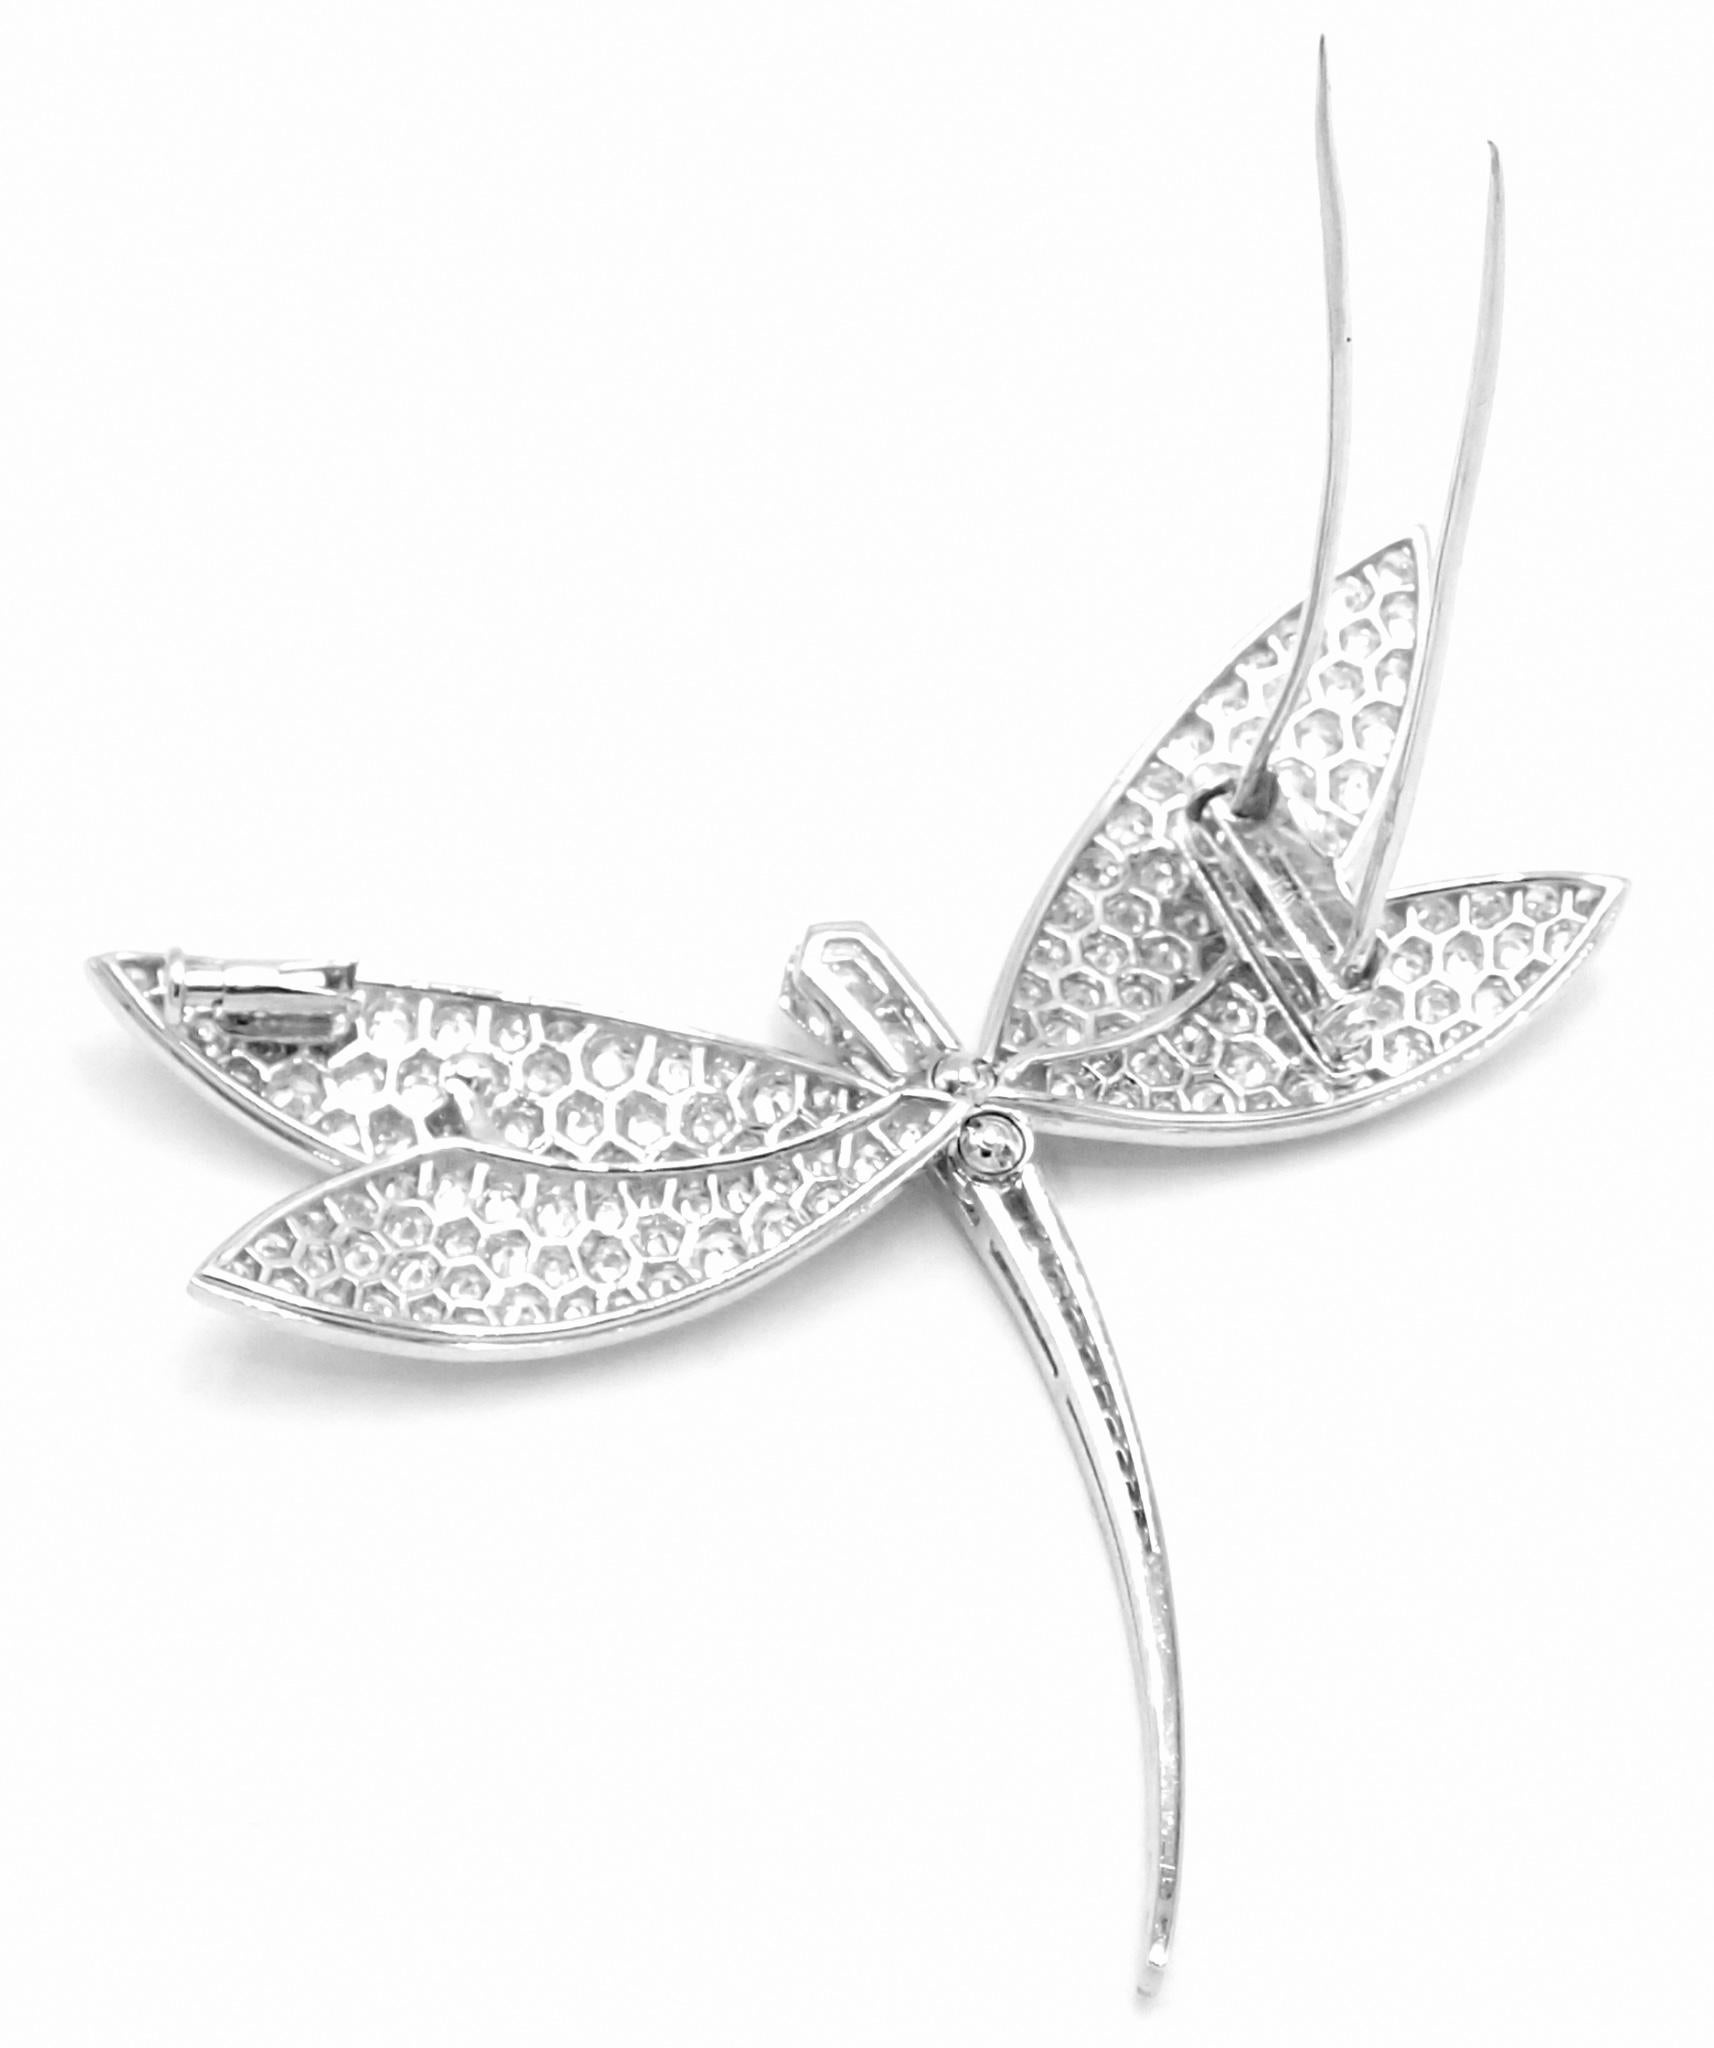 Van Cleef & Arpels Dragonfly Diamond Extra Large White Gold Pin Brooch 2